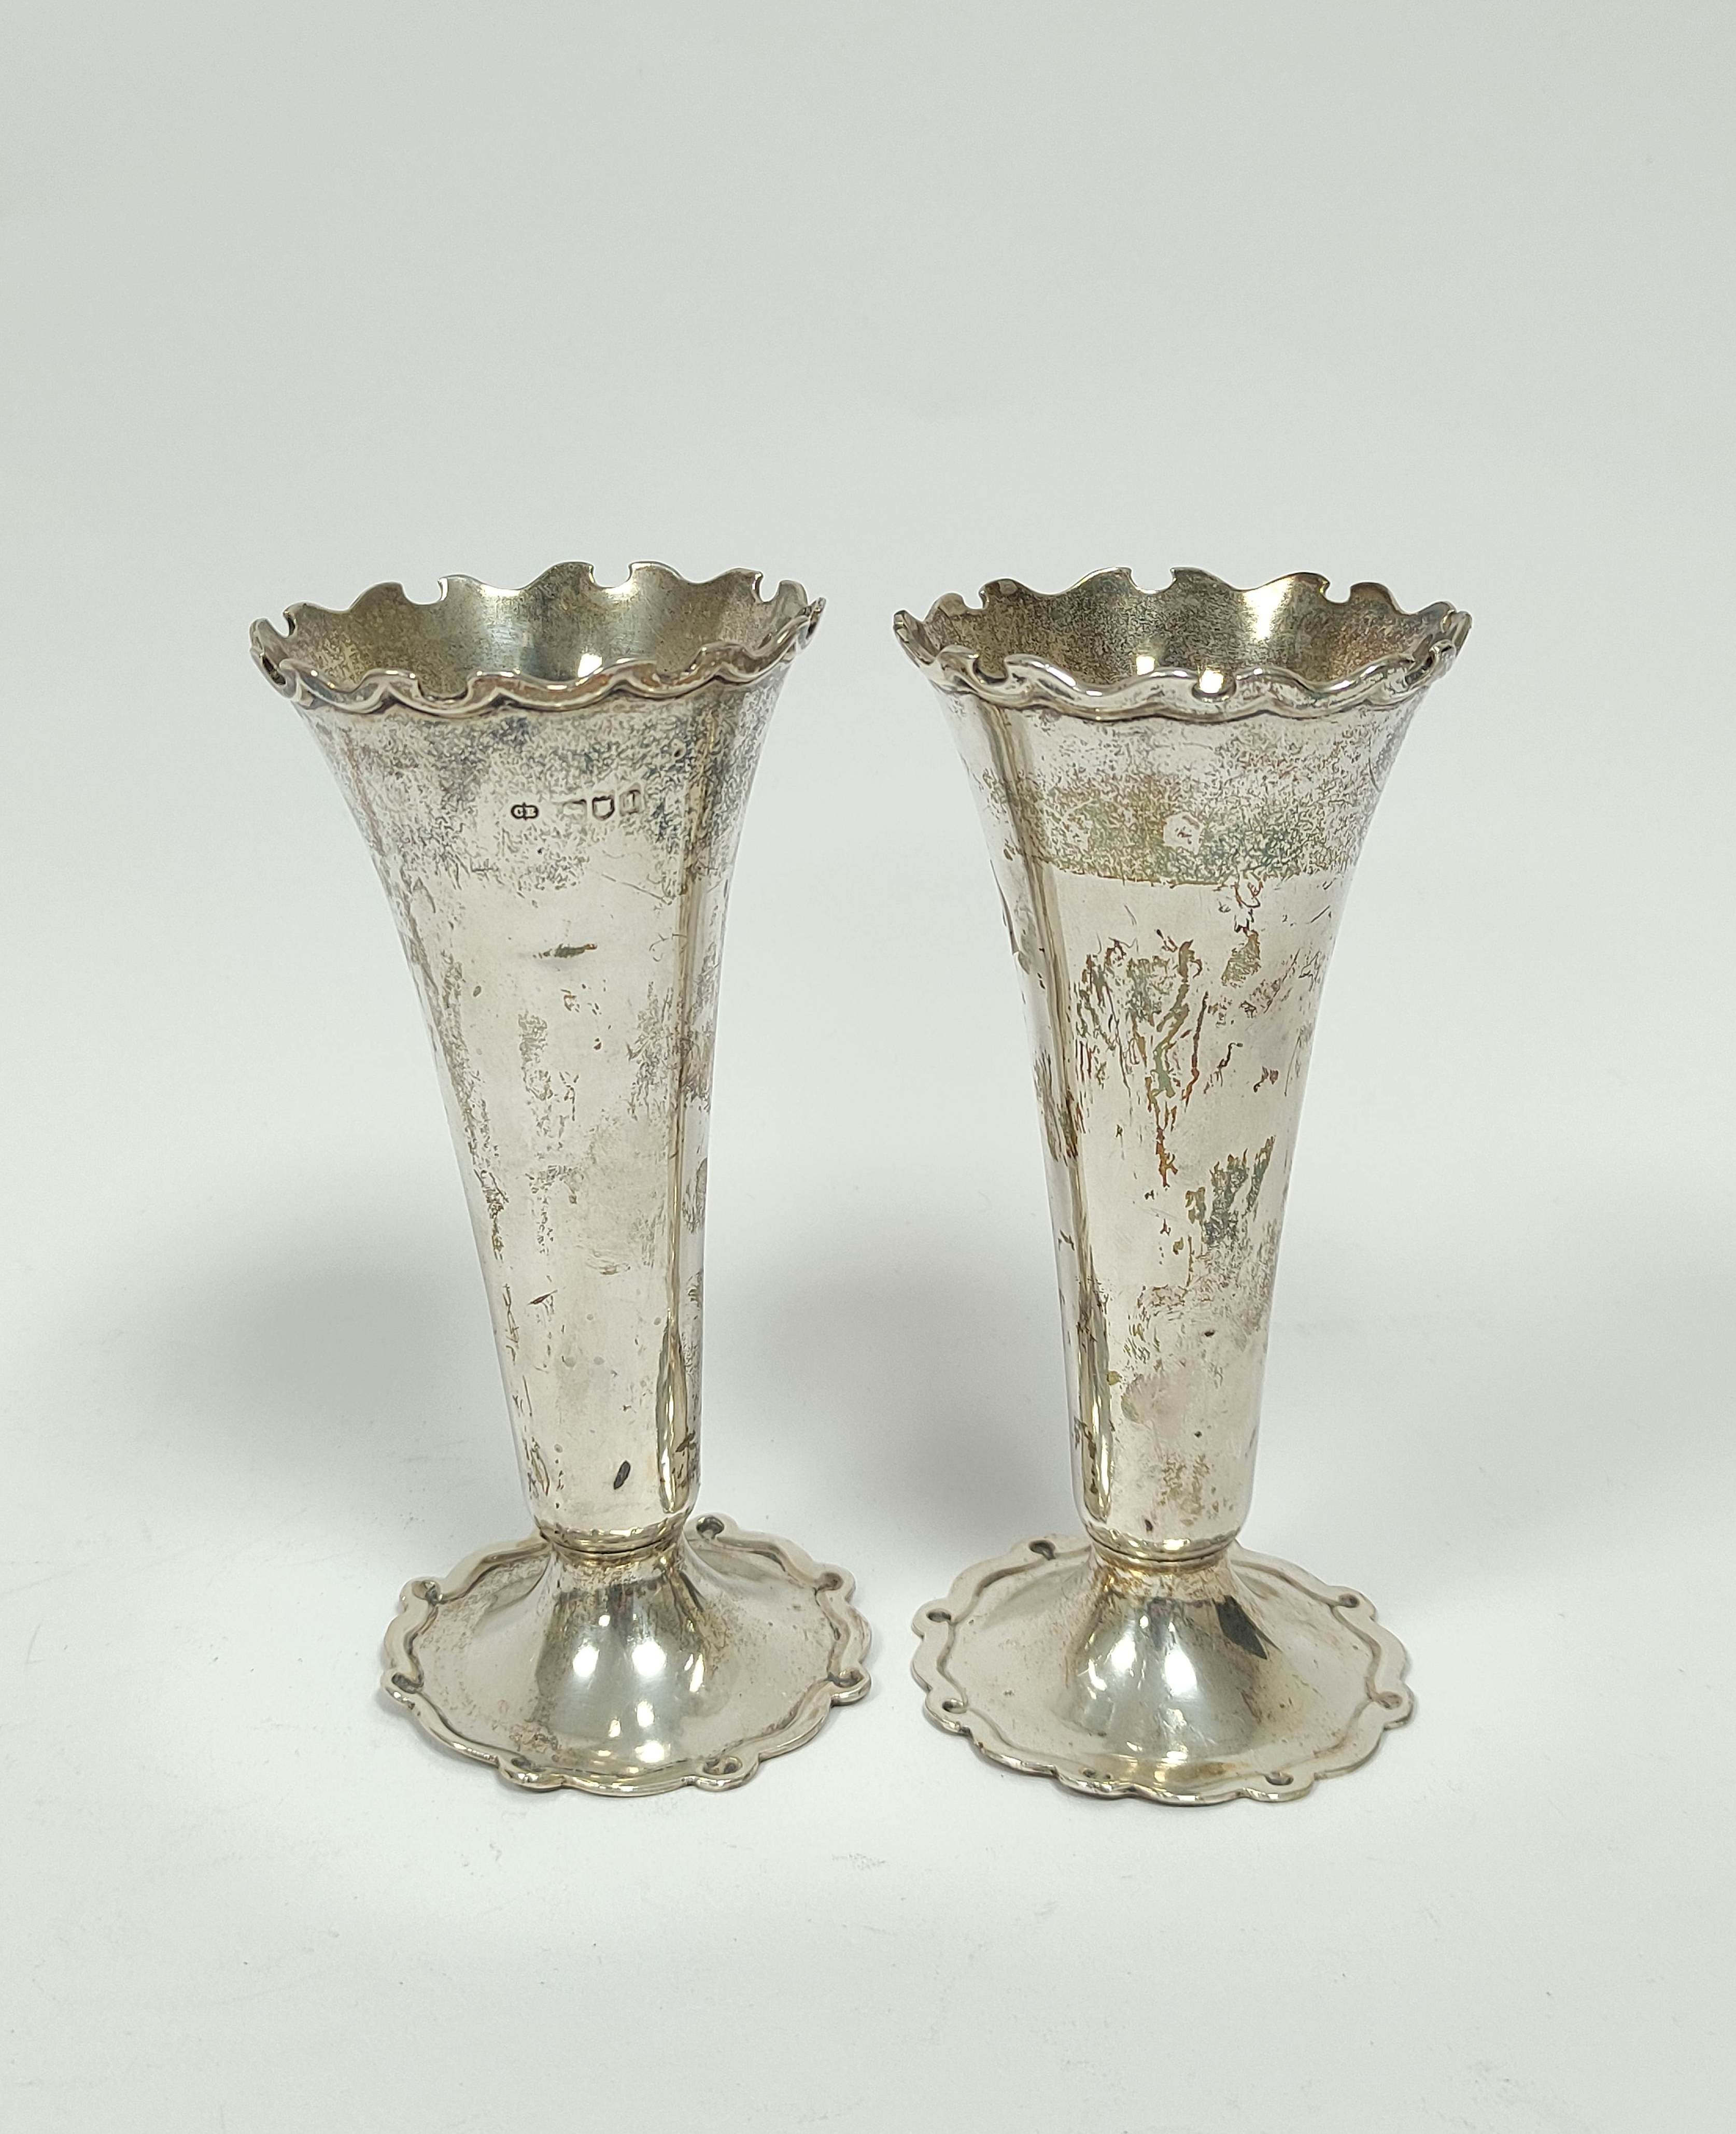 Pair of silver vases, tapering with scroll edges, Charles Edward 1906, 188g / 6oz.